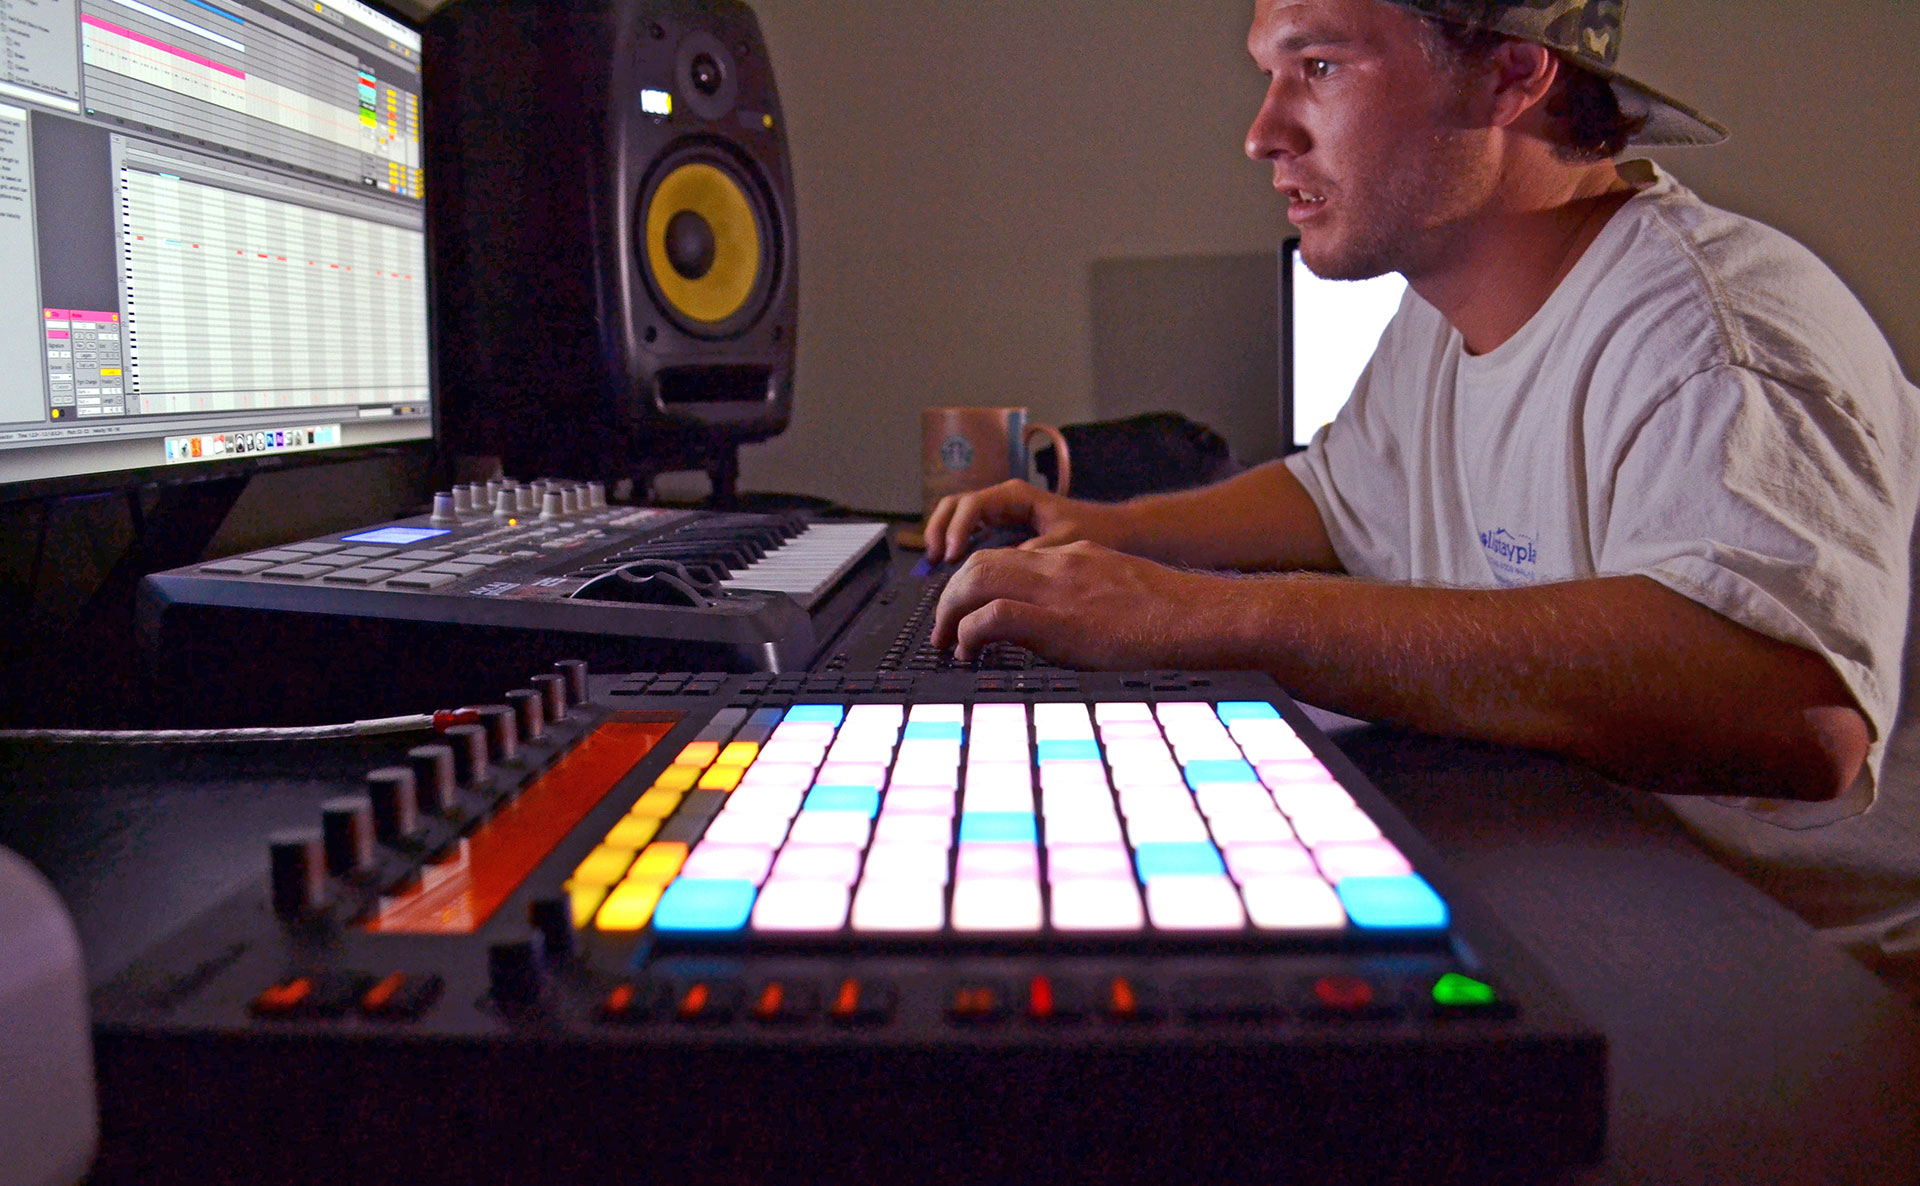 October 10, 2015 | Westlake Village, California | 9:09pm |
There are a variety of different production programs producers use when making new music. “I mainly use Ableton Live 9 to create the main structure of a track, but I also know Pro Tools and some of Logic Pro which I generally use later on for different aspects of the music production process,” Thibo said. Sometimes he even utilizes different programs for one track in order to achieve the ultimate sound, perfect for whatever track he is creating.